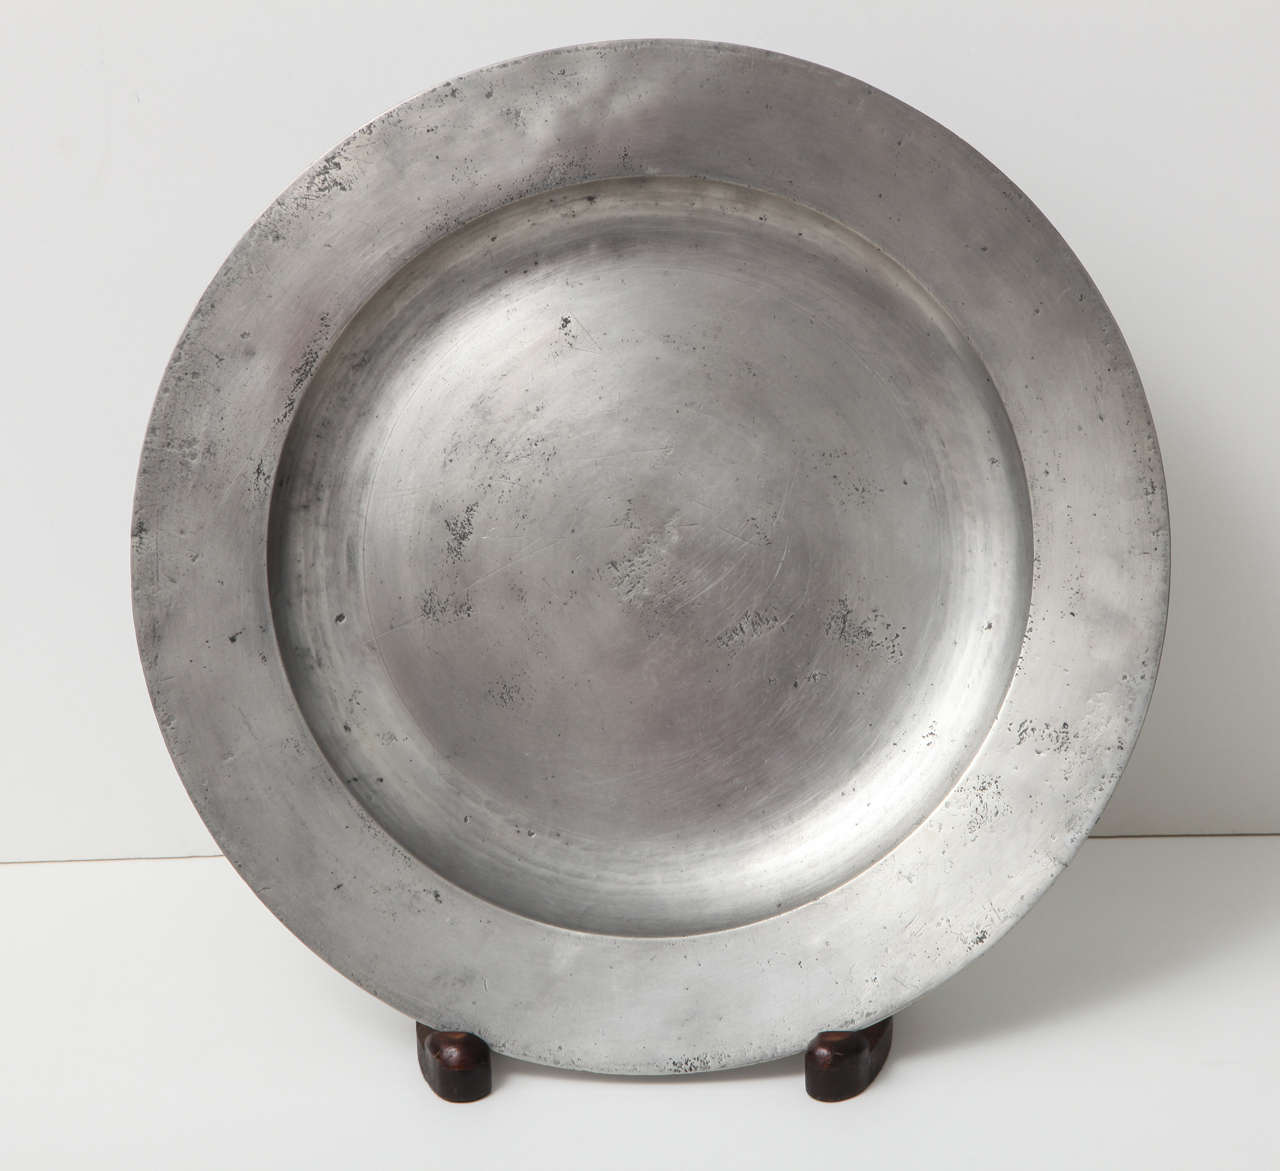 An unusually large 18th century English pewter charger
circa 1730